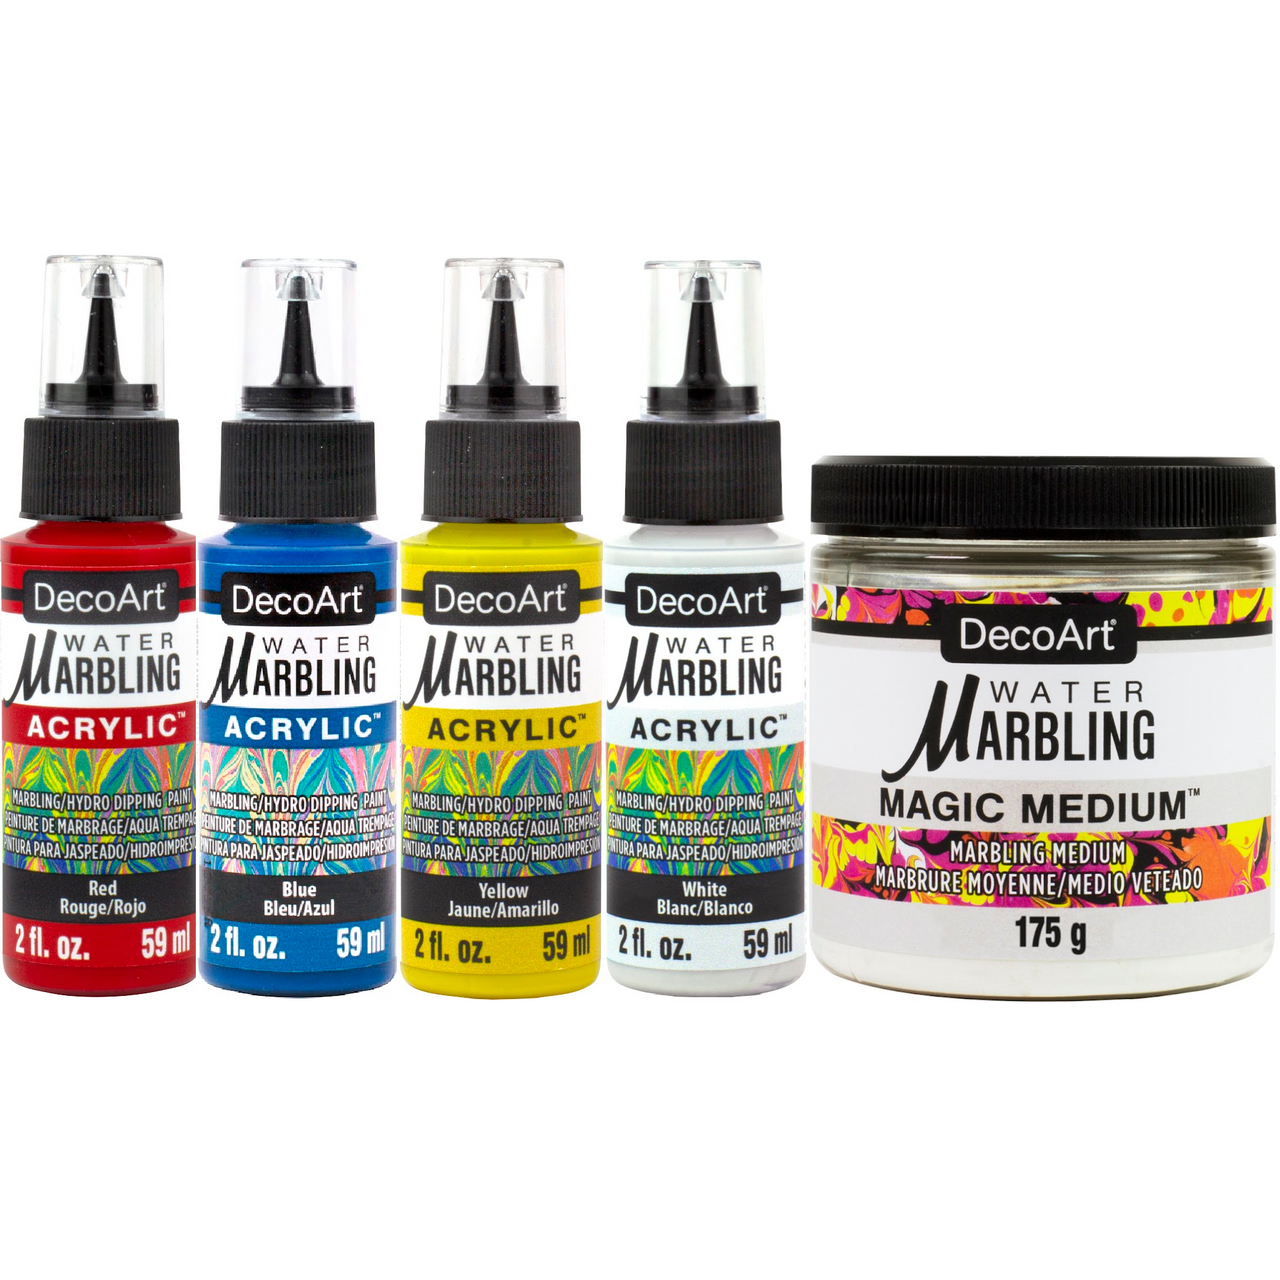 Marbling Paint Kit Available in 6 and 12 colors DM US TO ORDER